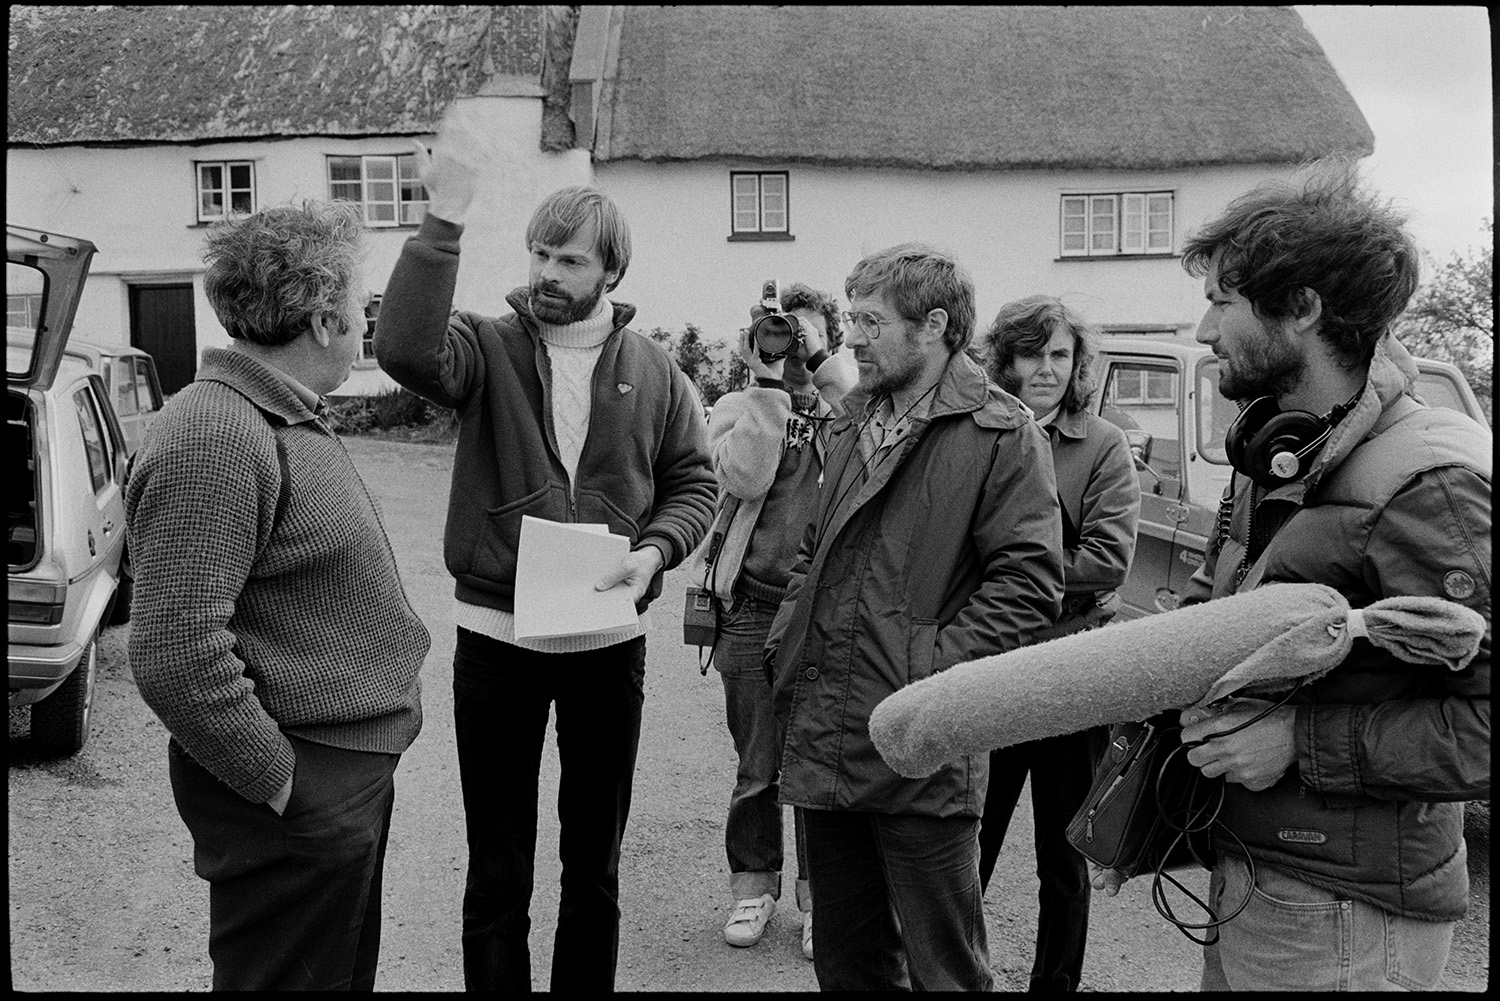 Club Day, BBC film crew with director.
[Tony Byers with a BBC film crew talking to a man at Iddesleigh Club Day in front of thatched cottages. He is waving his hand in the air.]